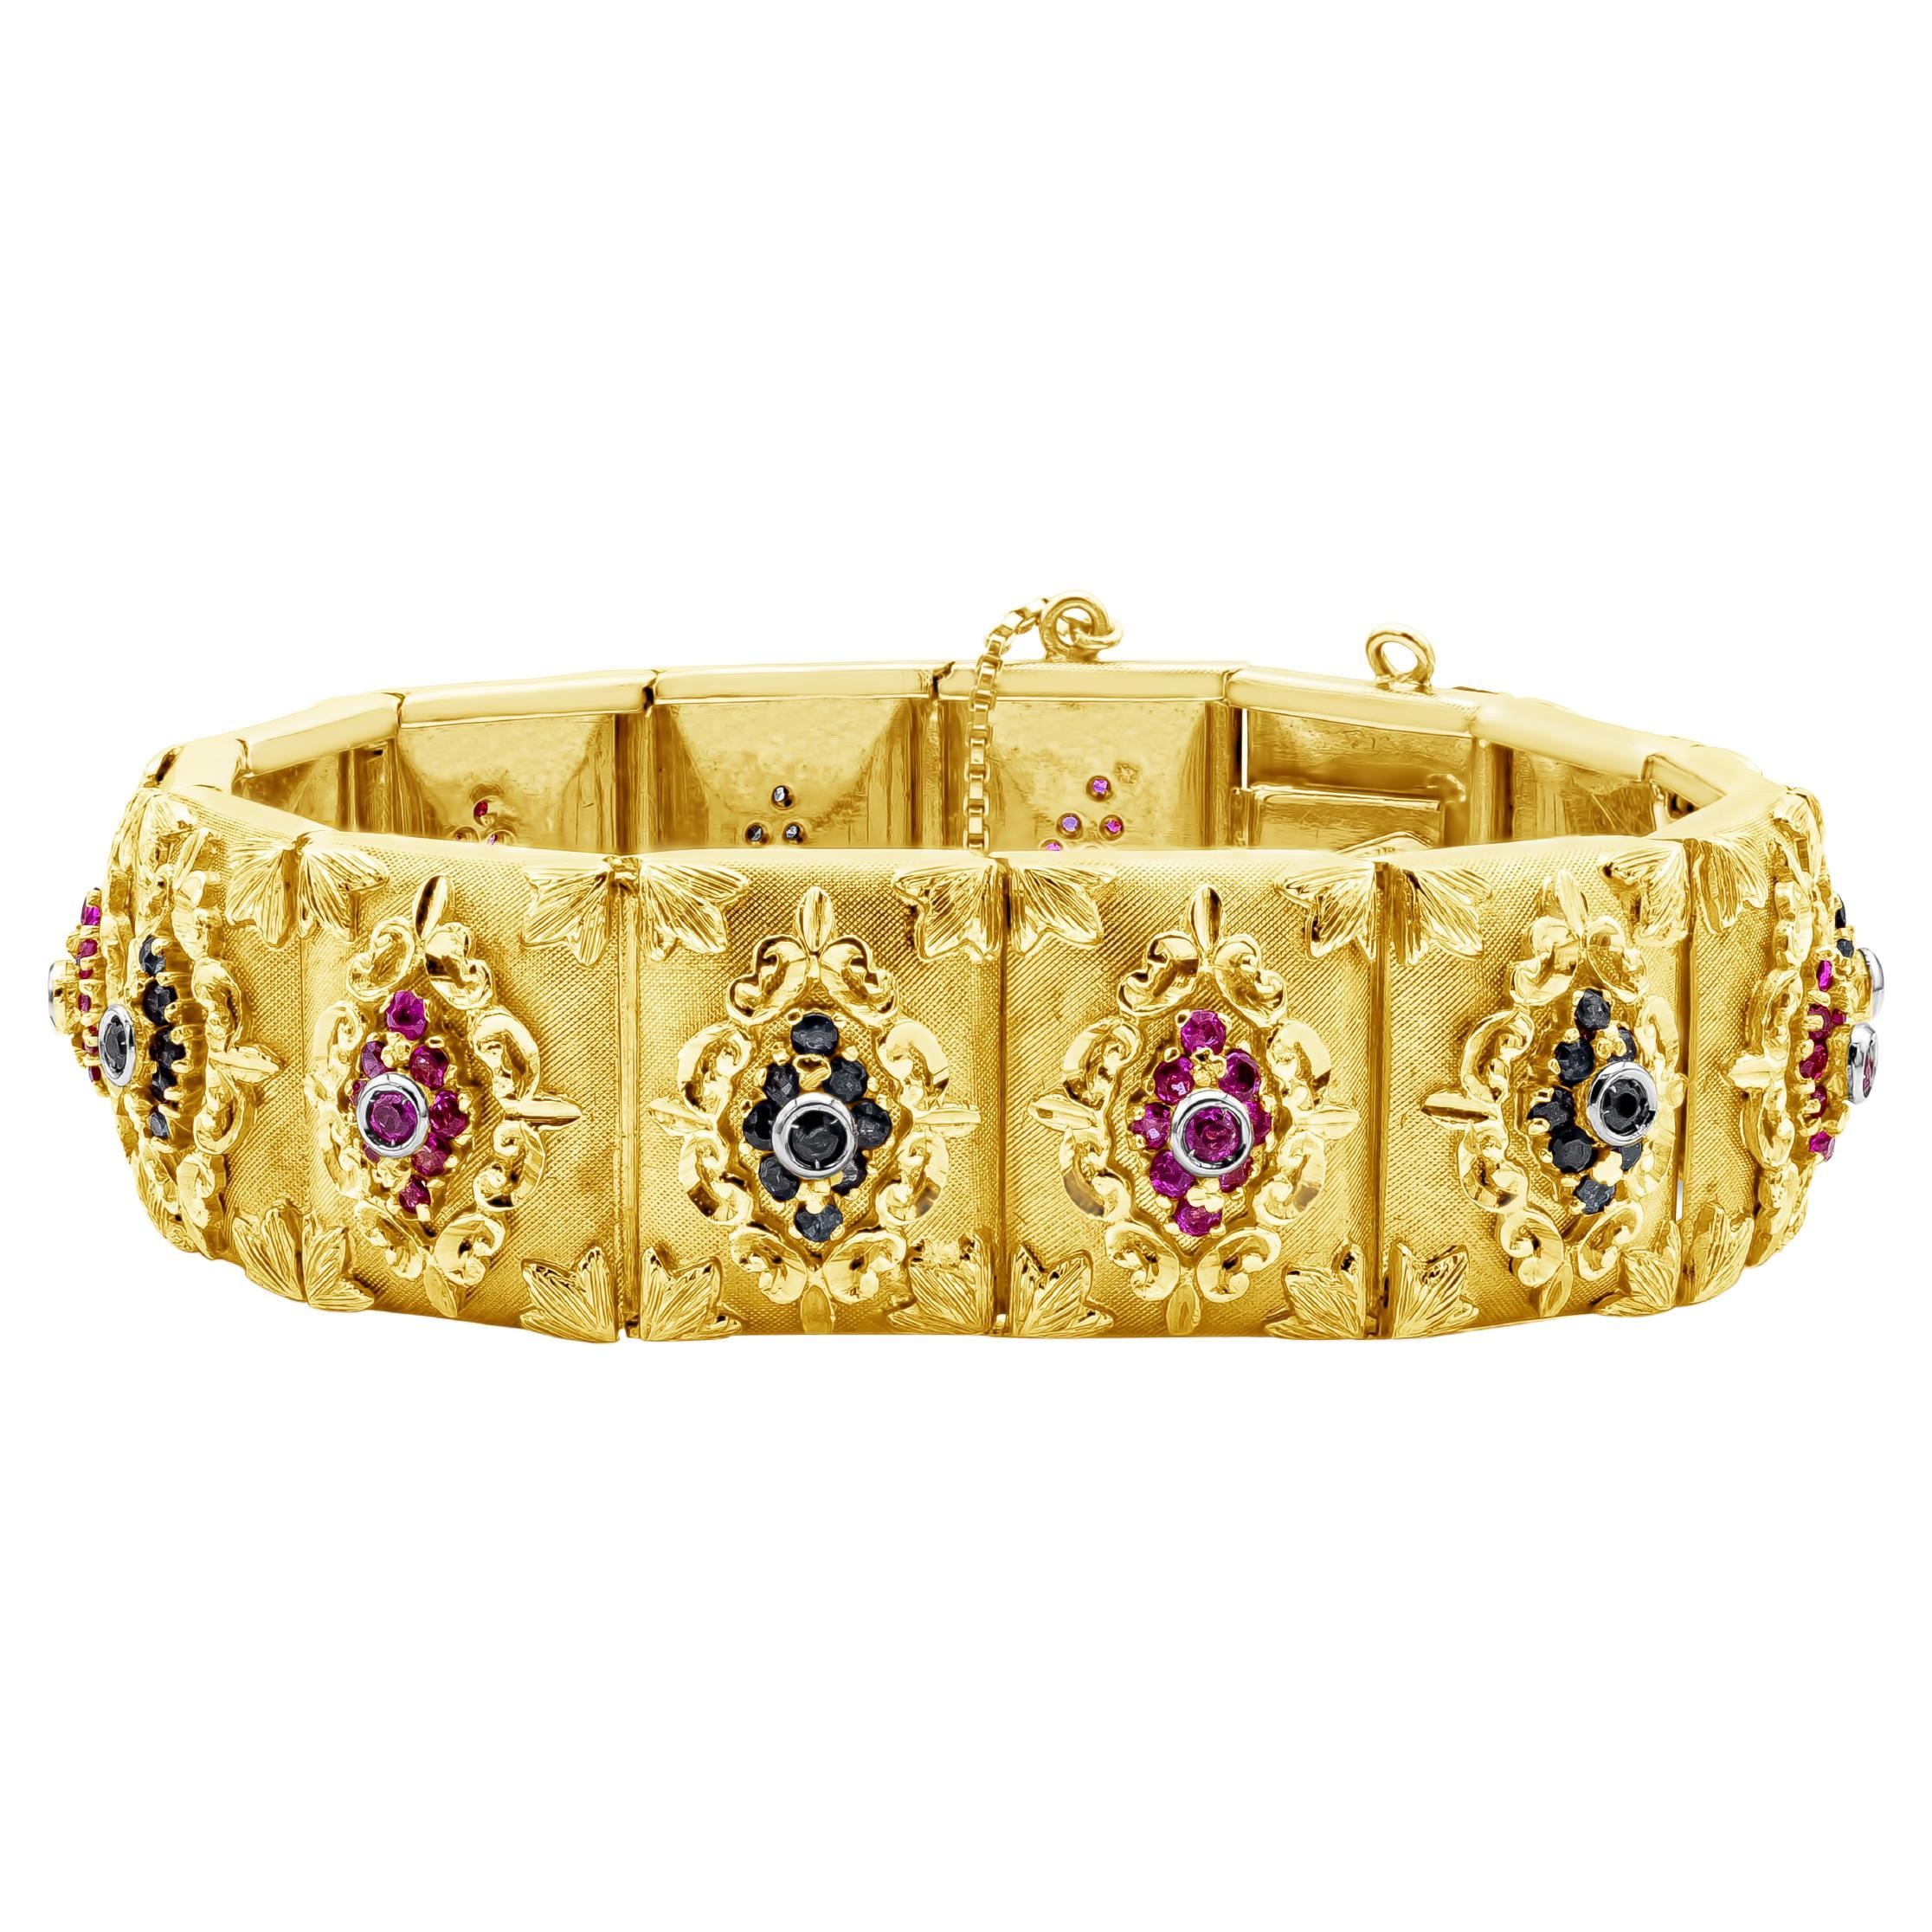 3.80 Carat Total Ruby & Sapphire Handcrafted Yellow Gold Bracelet For Sale